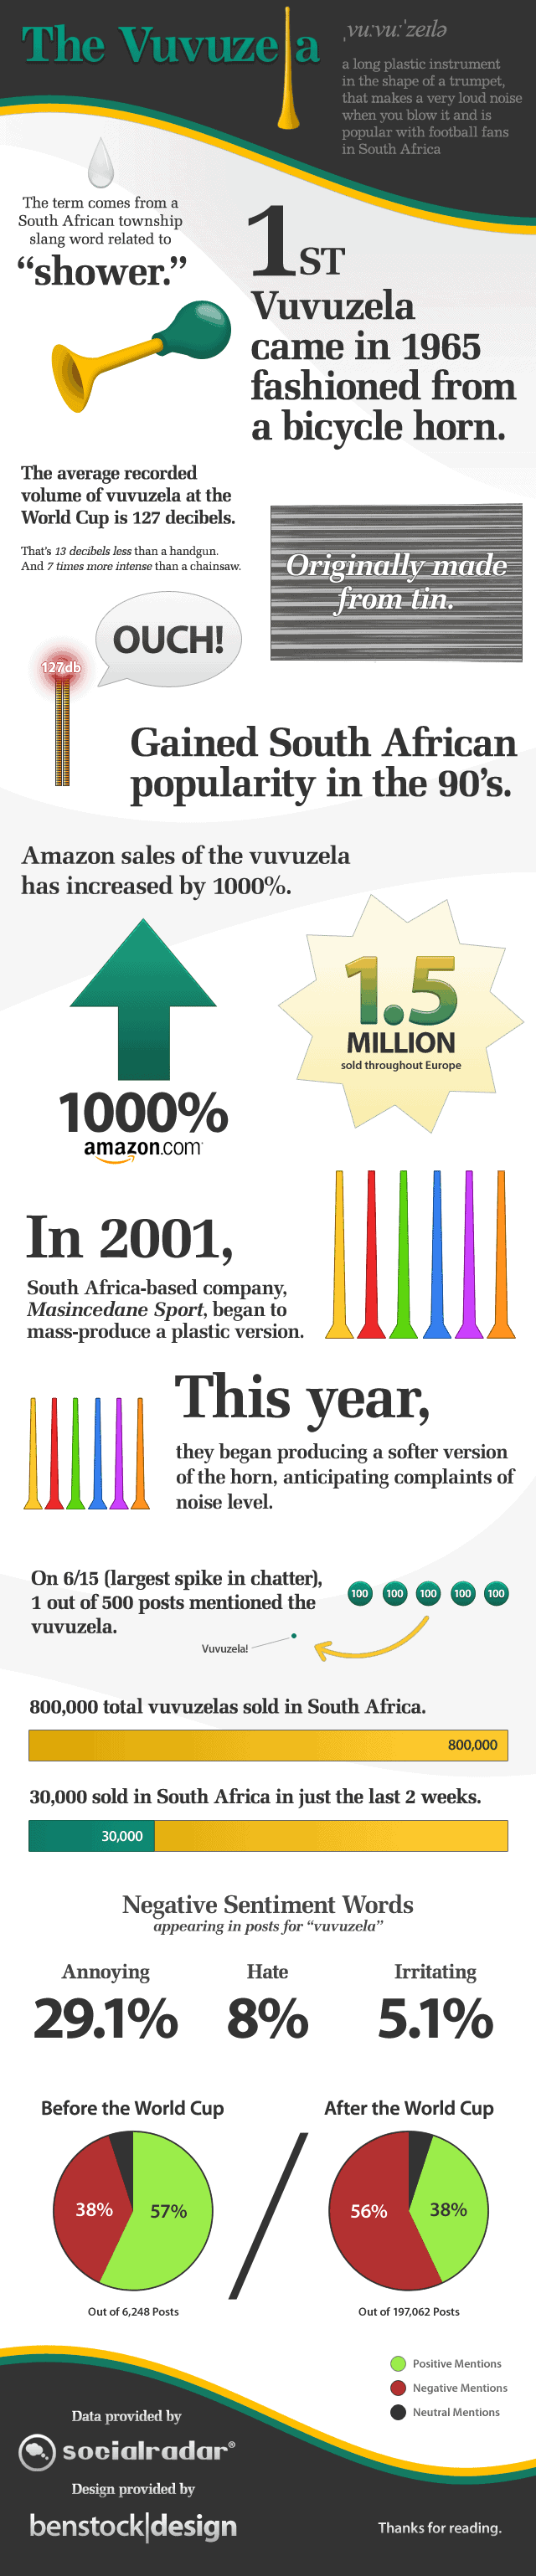 History and facts about the vuvuzela, an instrument used heavily in the South Afican World Cup